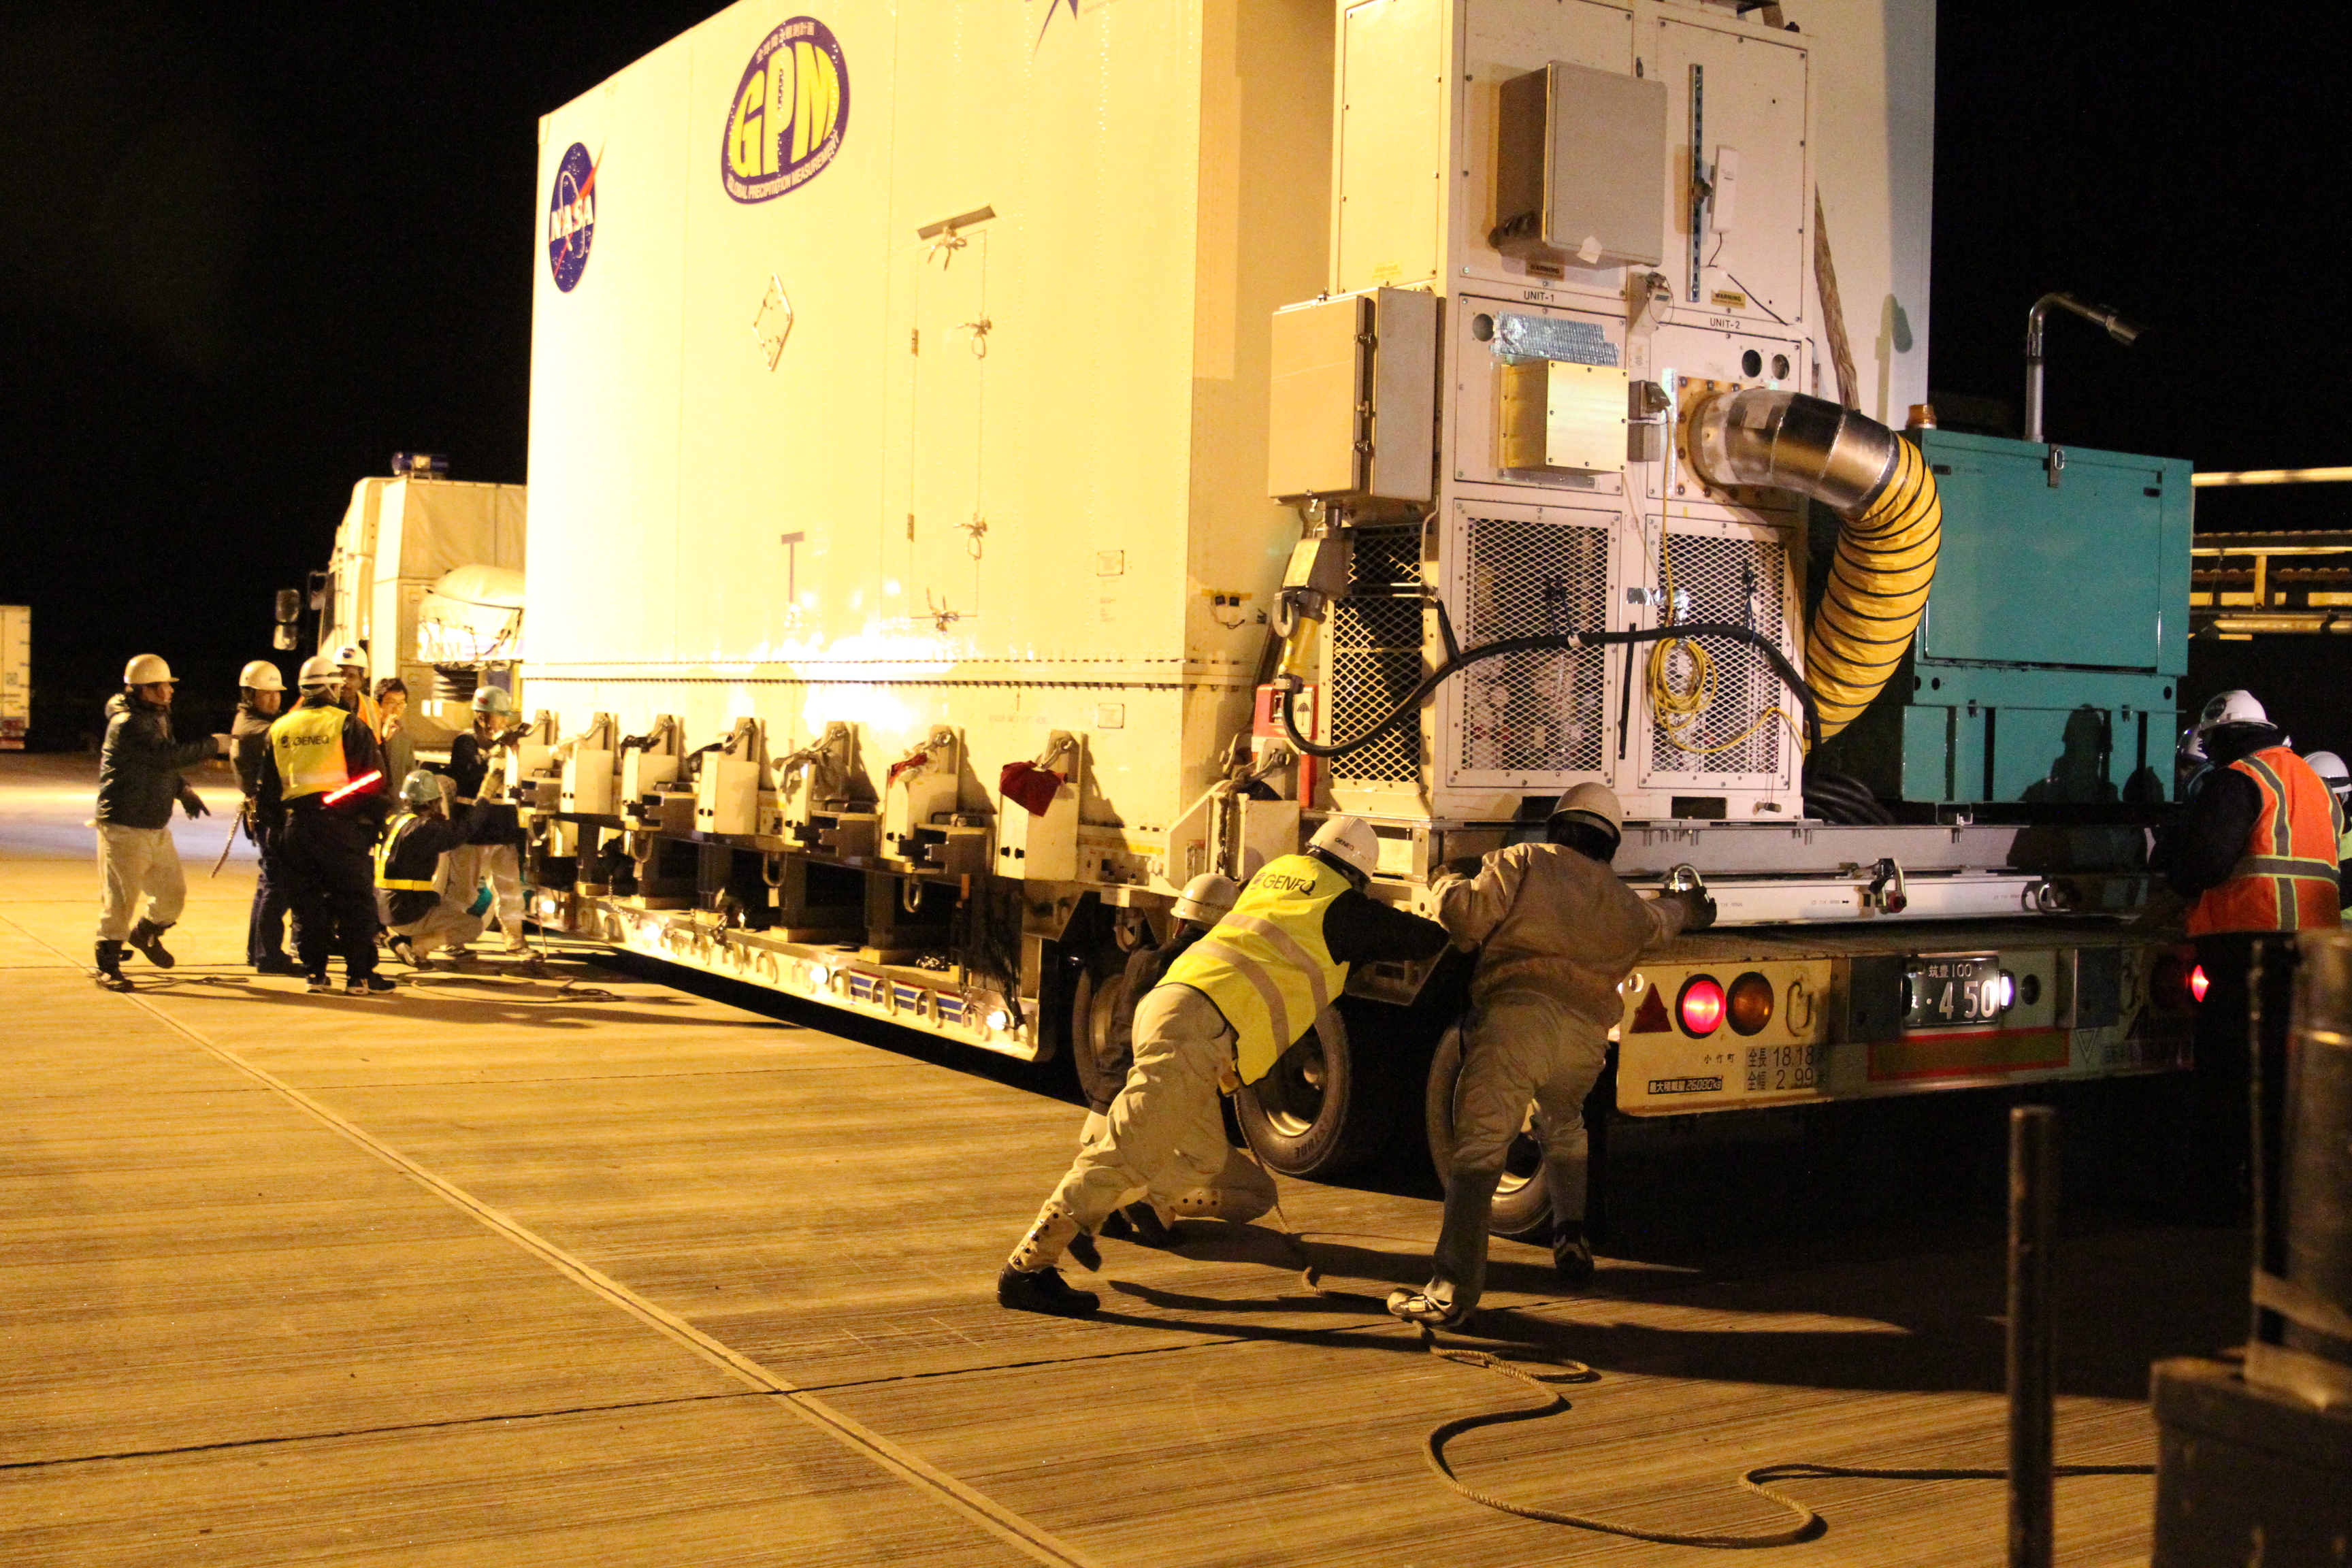 GPM Loaded onto Truck in Japan